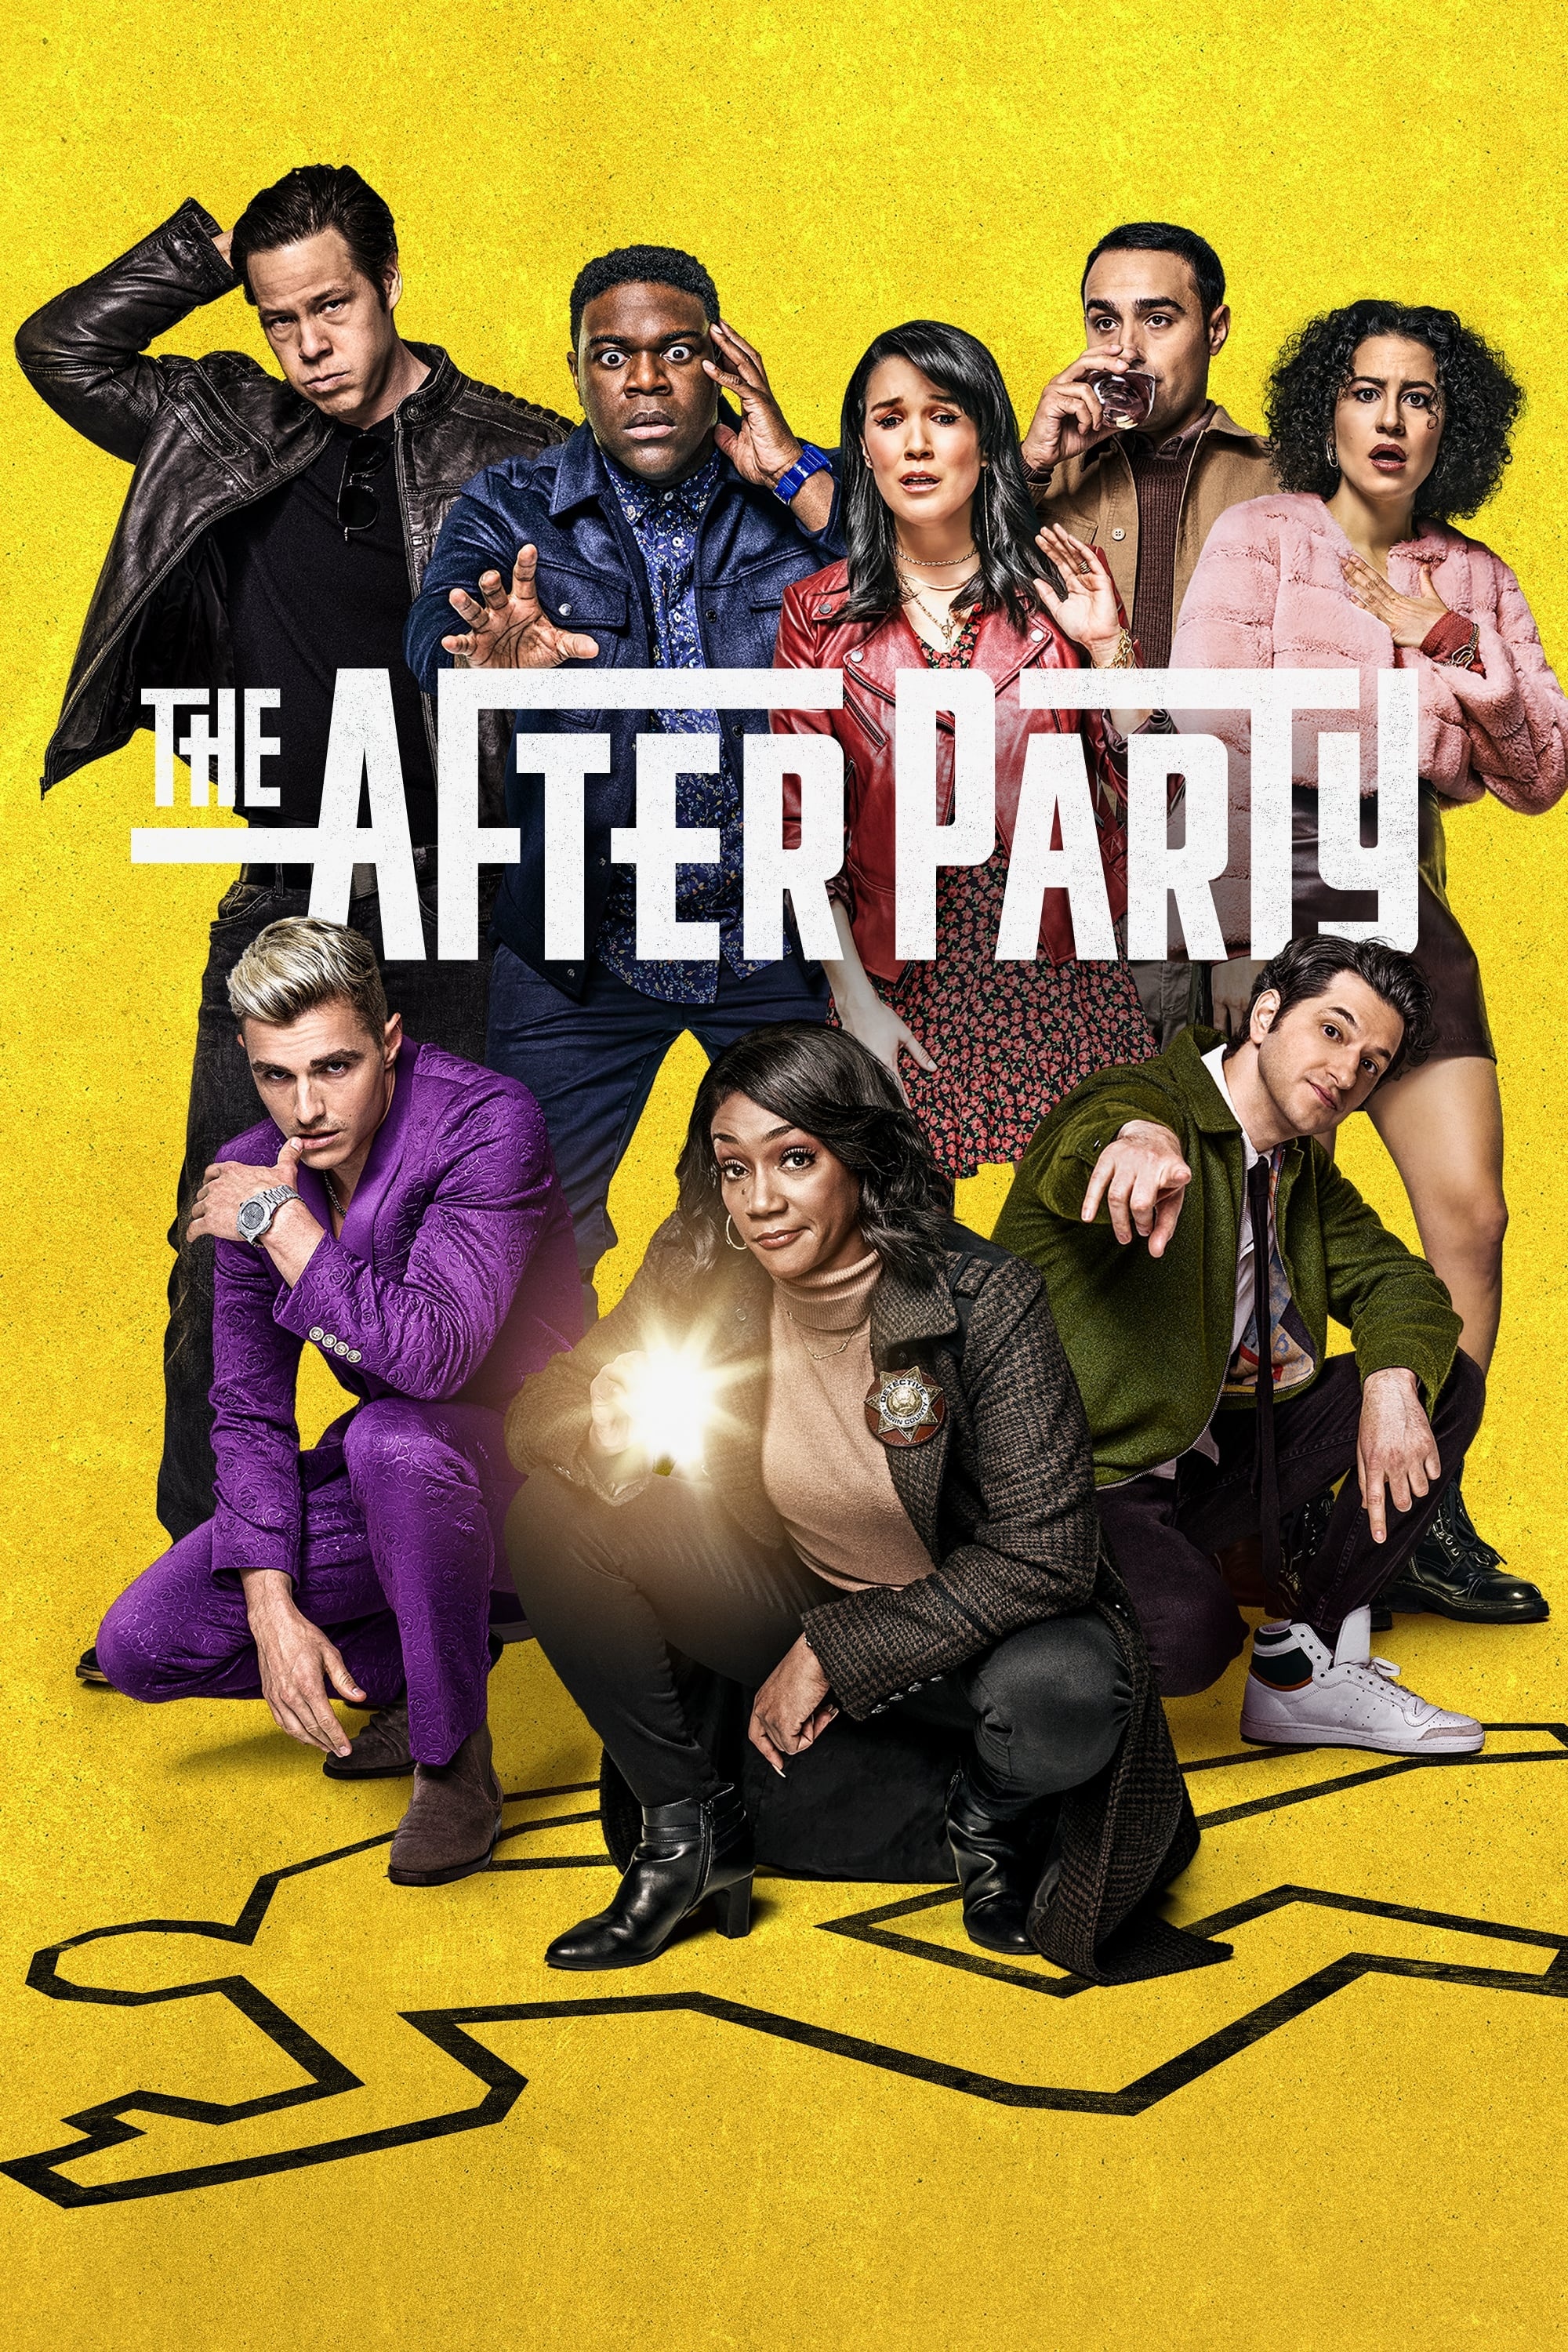 The Afterparty TV series, Comedy ensemble cast, Celebrity cameos, Hilarious party antics, 2000x3000 HD Phone